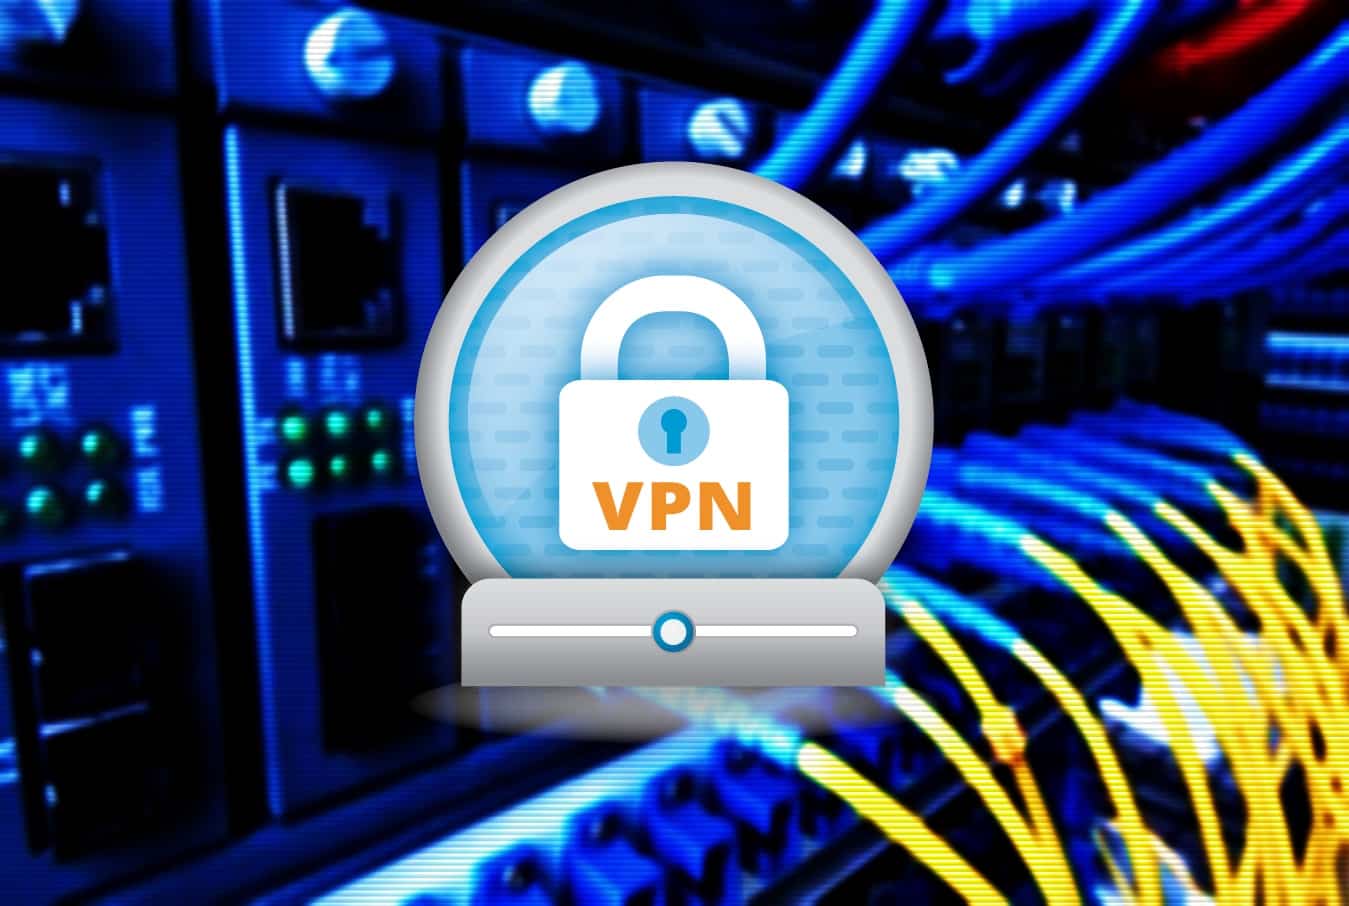 Can VPN really prevent the breach of personal data?